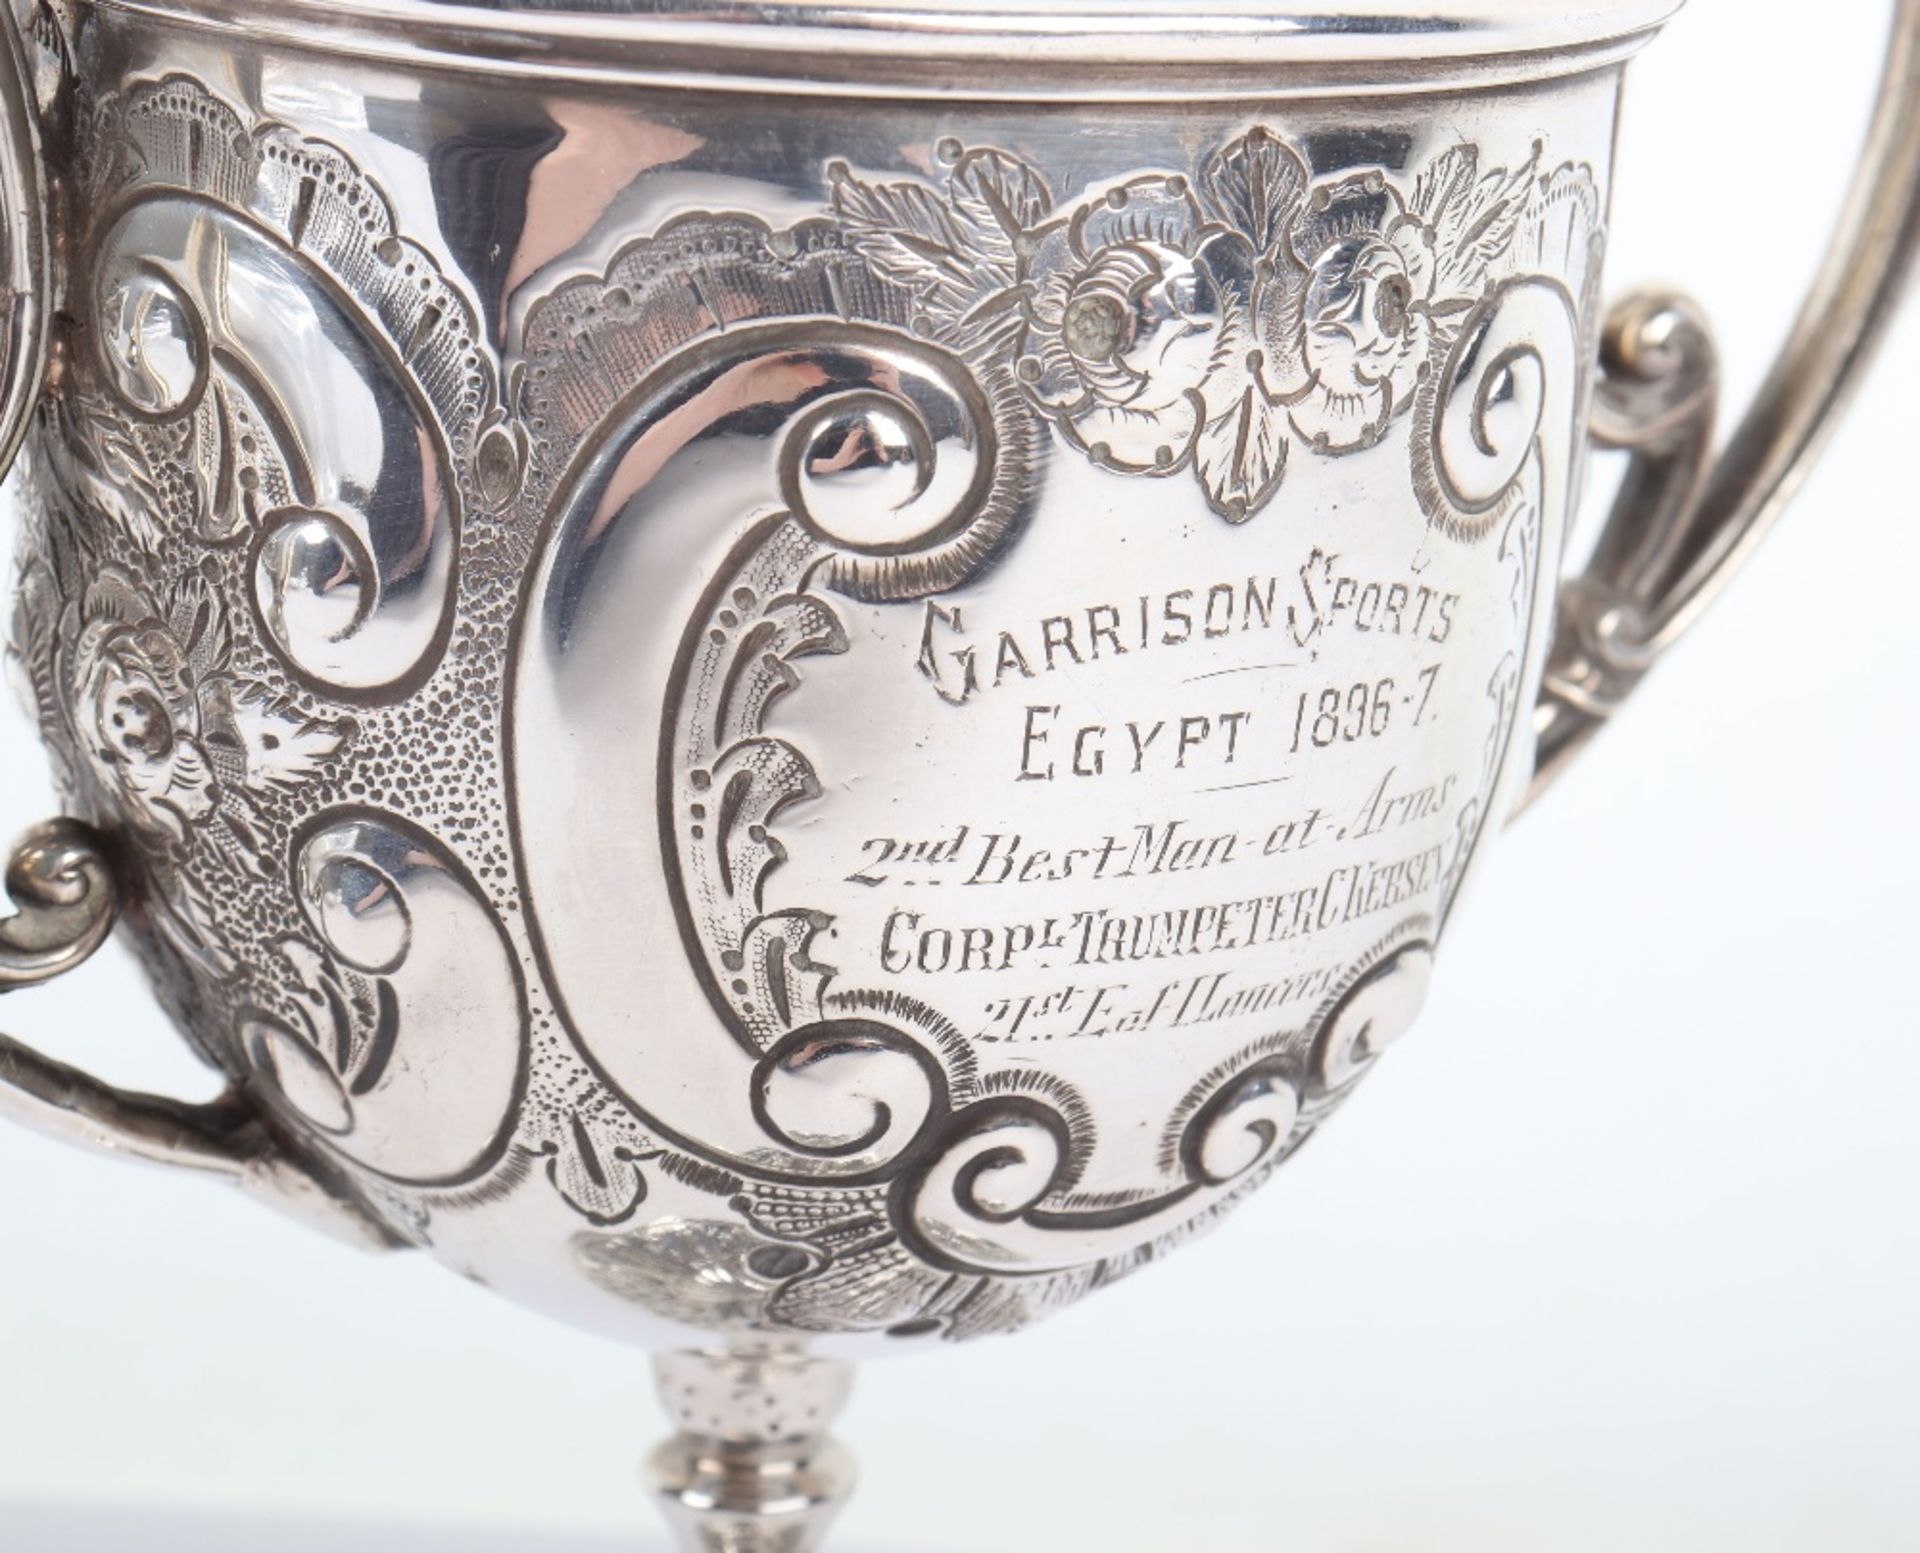 21st Empress of India Lancers Garrison Sports Cup Egypt 1896-7 - Image 2 of 7